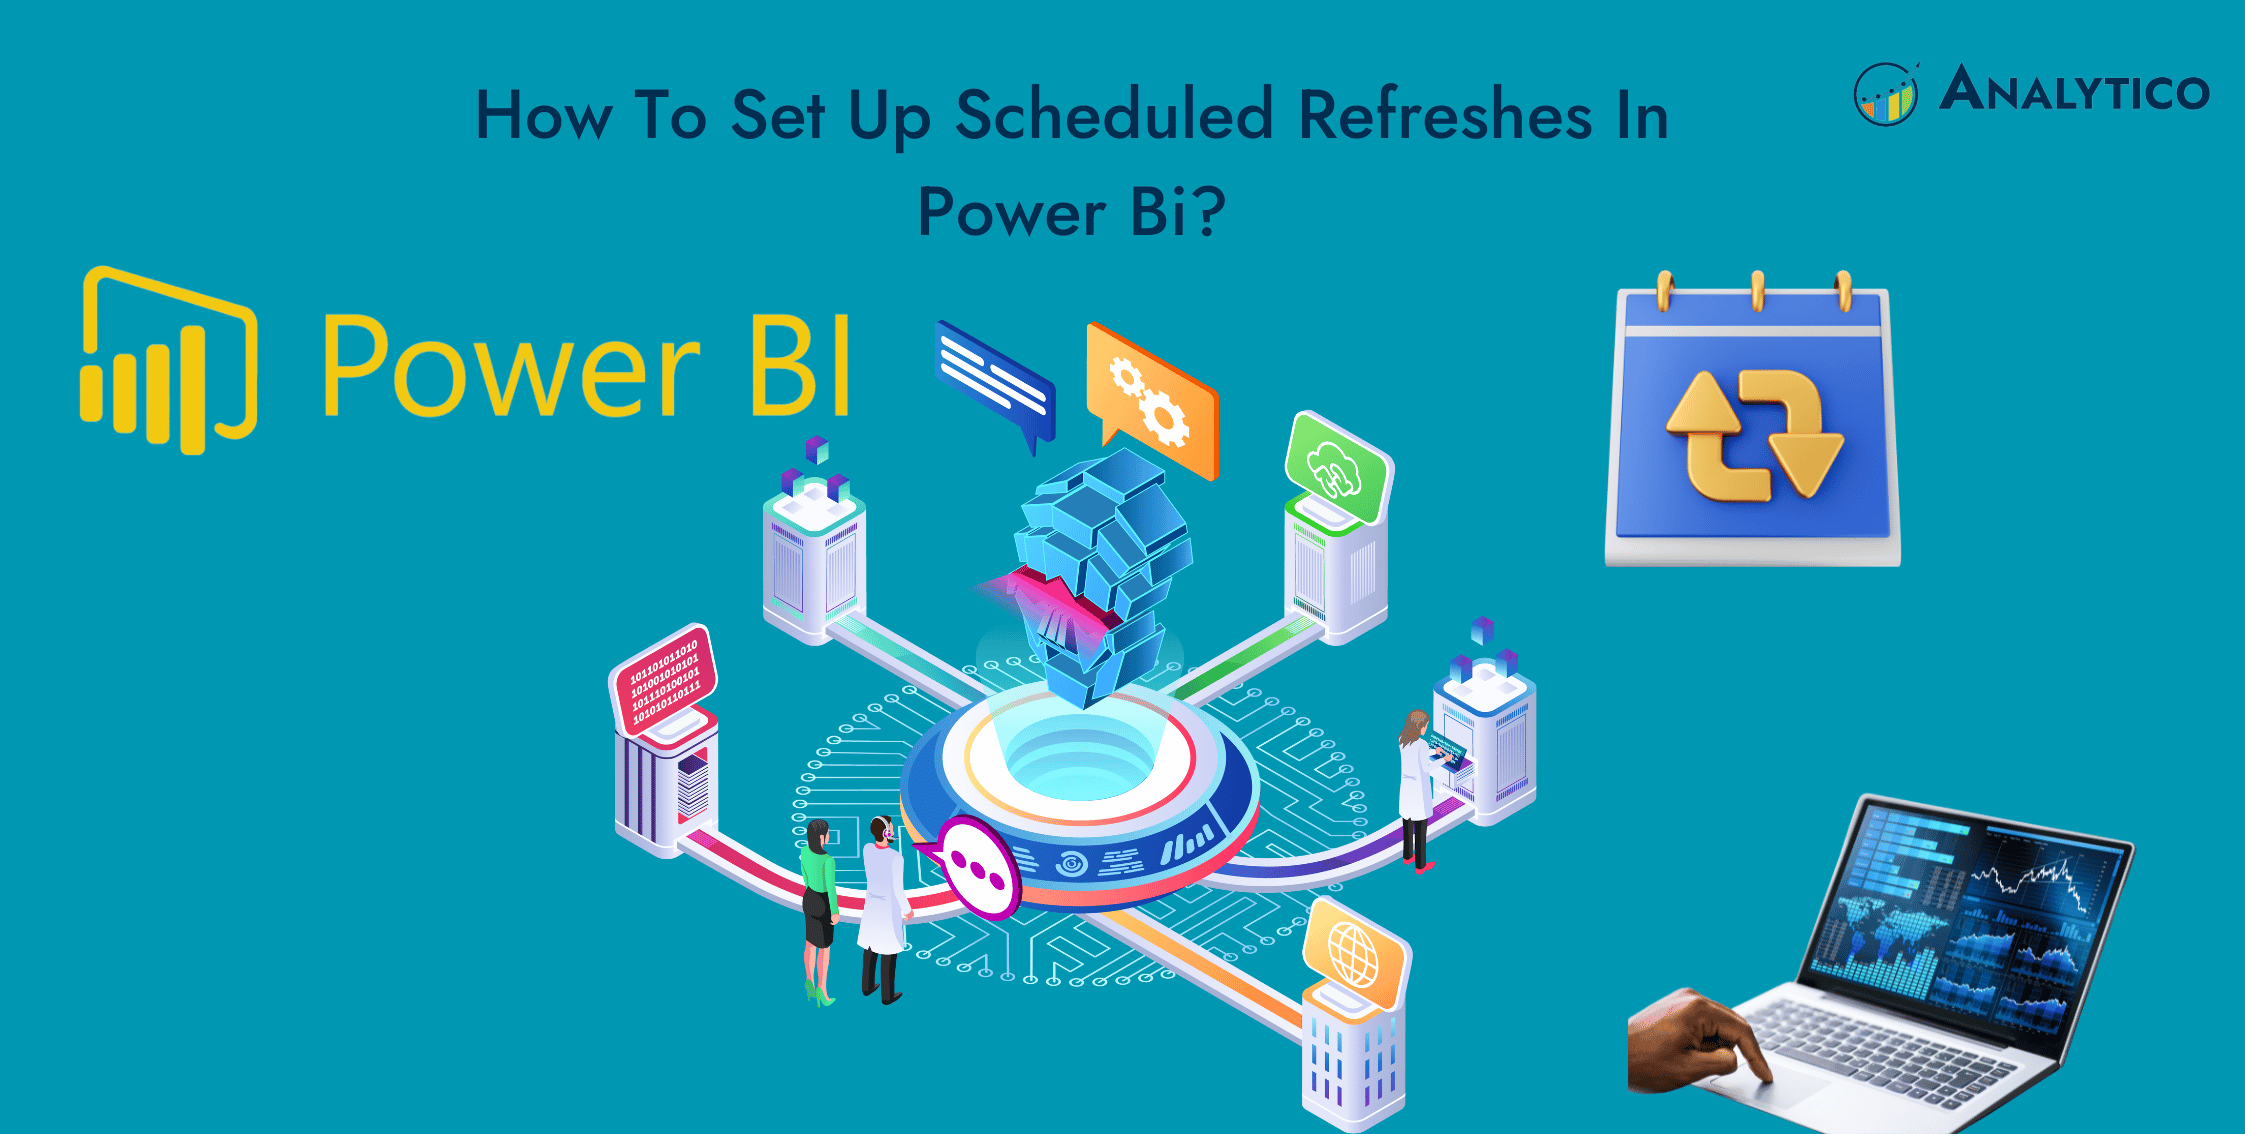 How To Set Up Scheduled Refreshes In Power Bi?